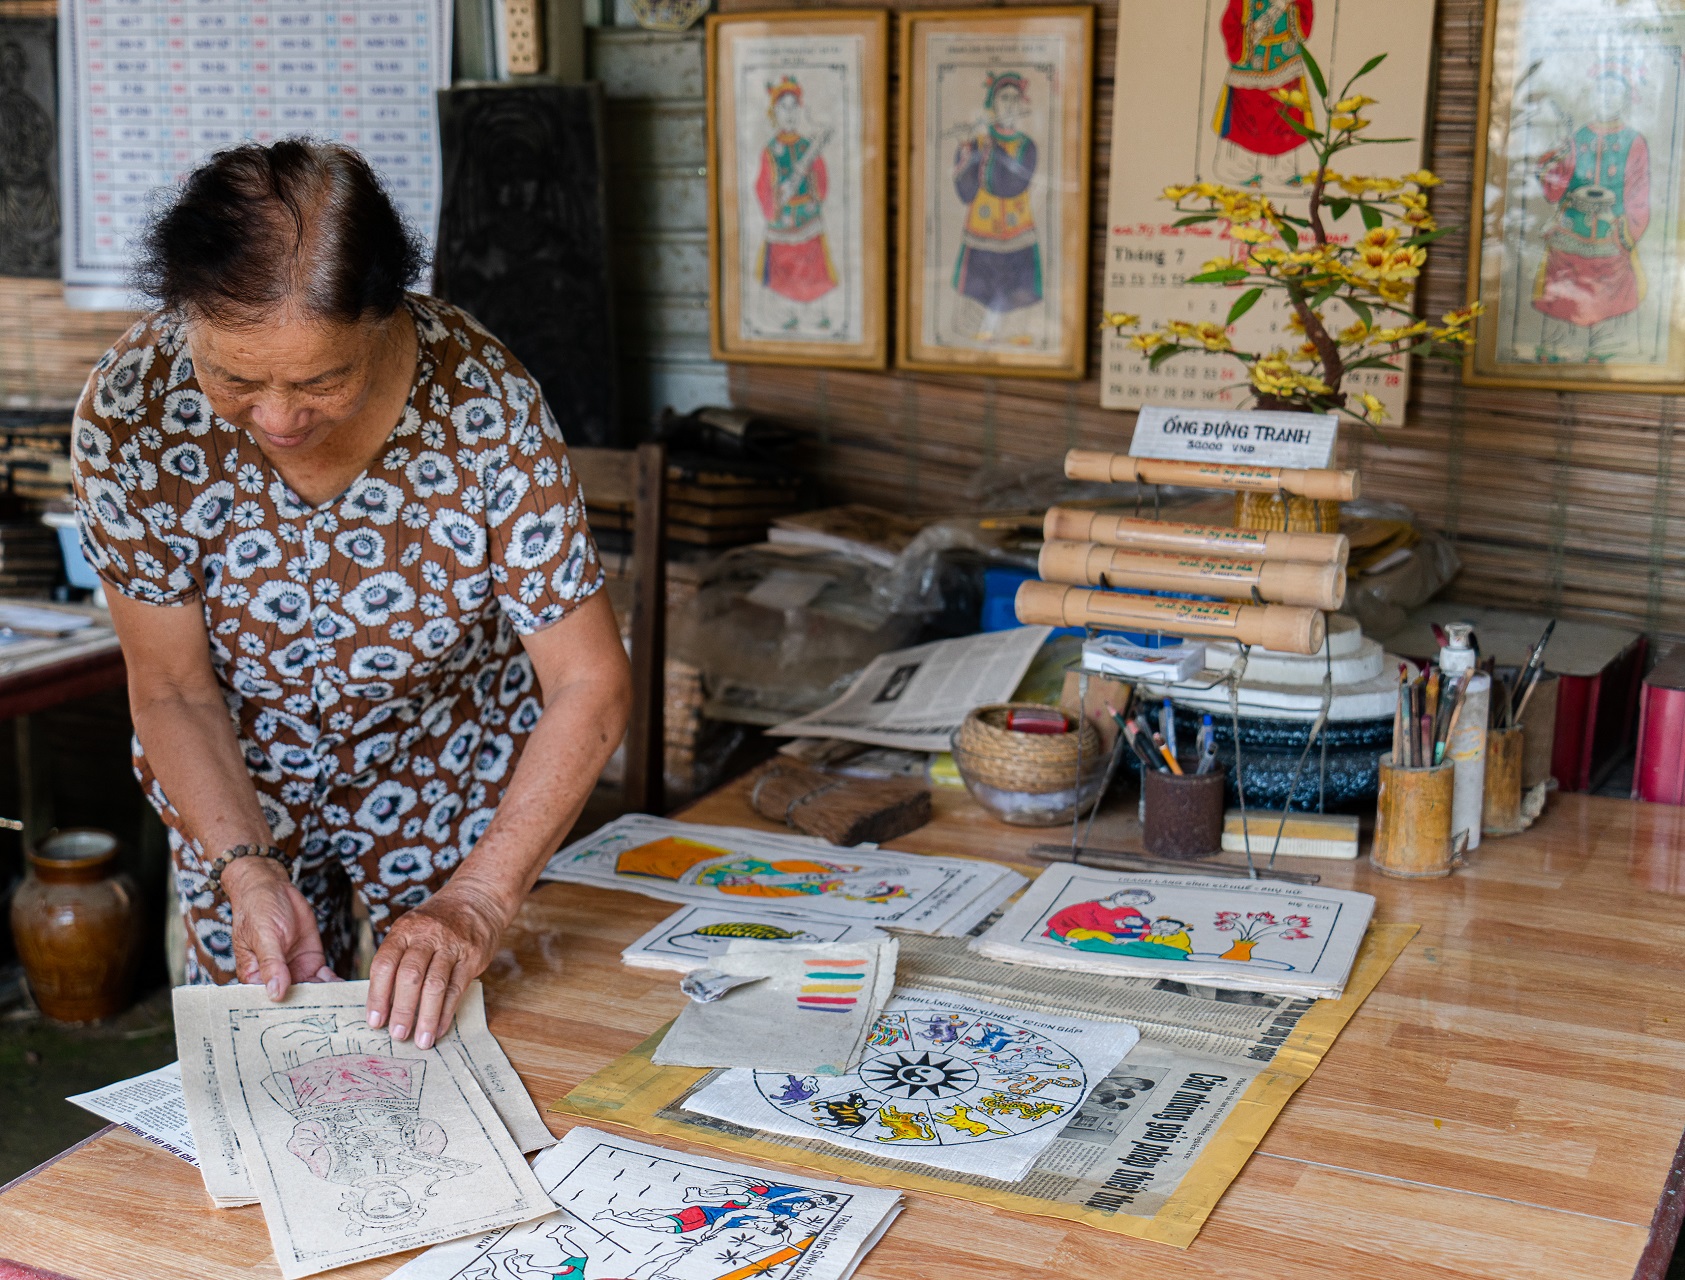 Tran Thi Gai, the wife of artisan Phuoc, introduces paintings of Sinh Village to tourists. Photo: Nguyen Trung Au / Tuoi Tre News